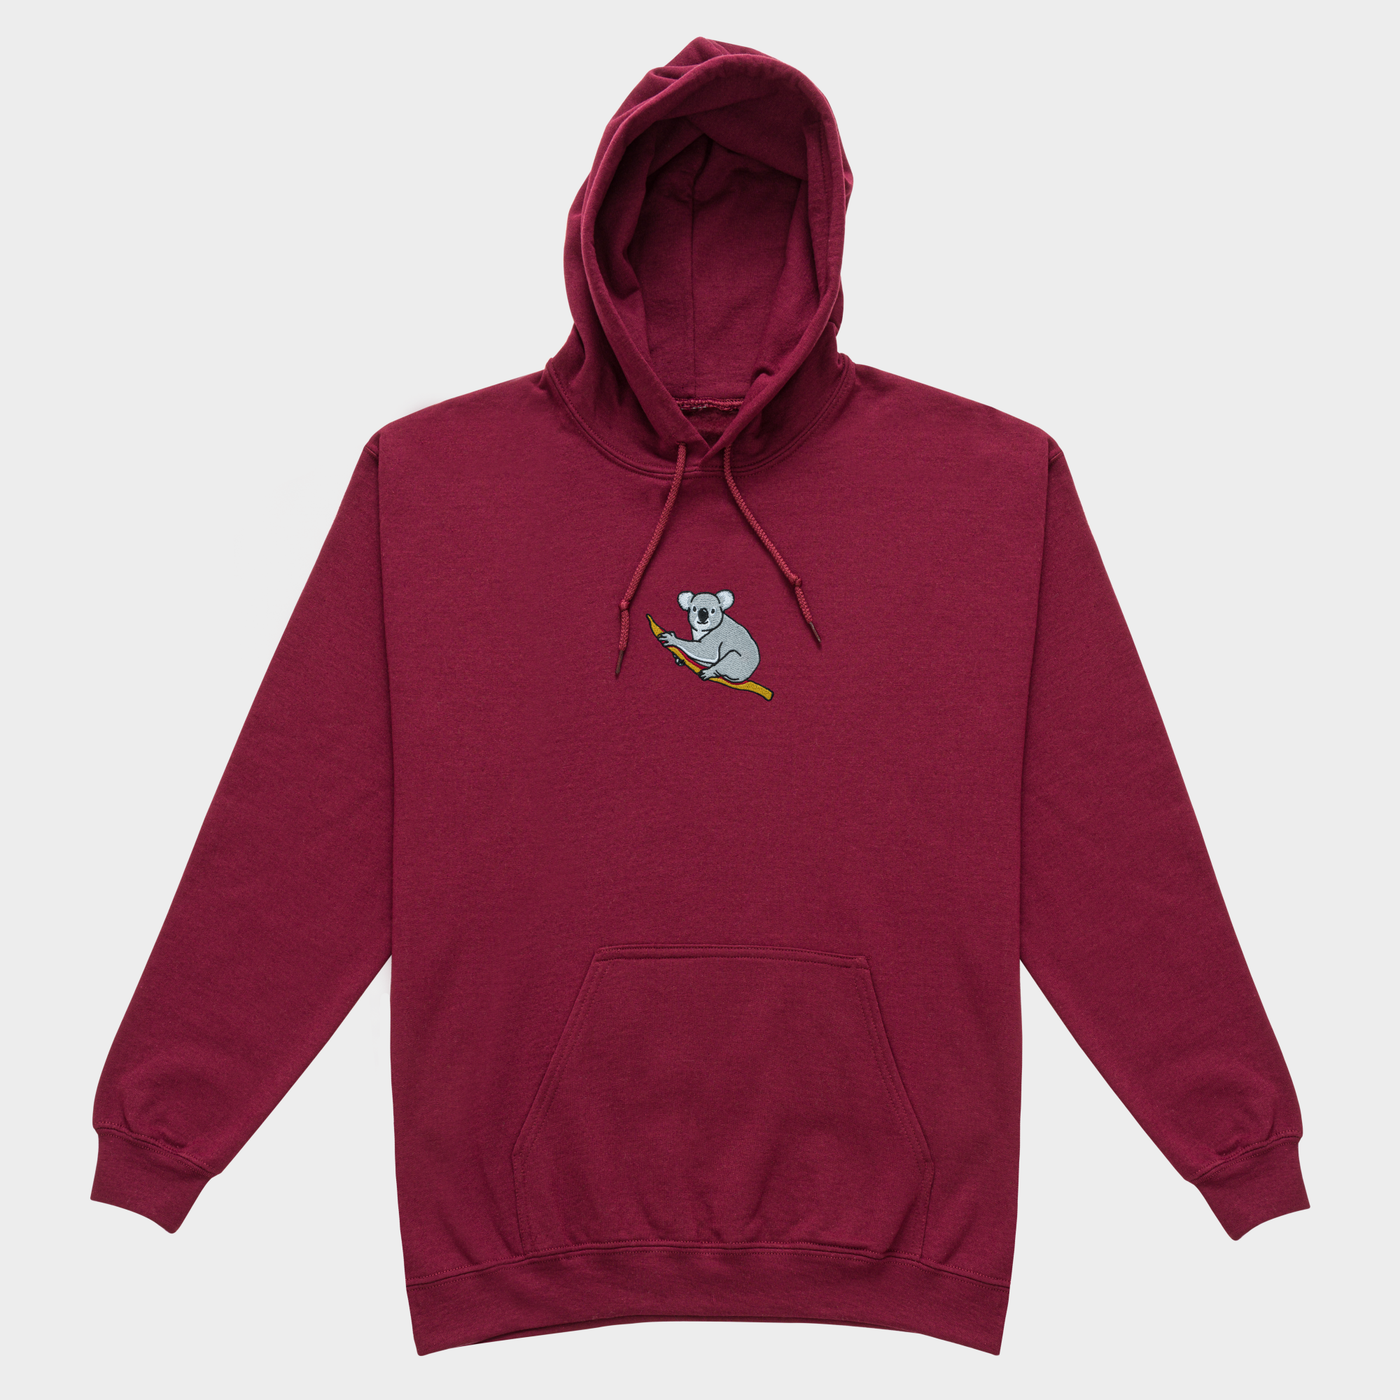 Bobby's Planet Men's Embroidered Koala Hoodie from Australia Down Under Animals Collection in Maroon Color#color_maroon